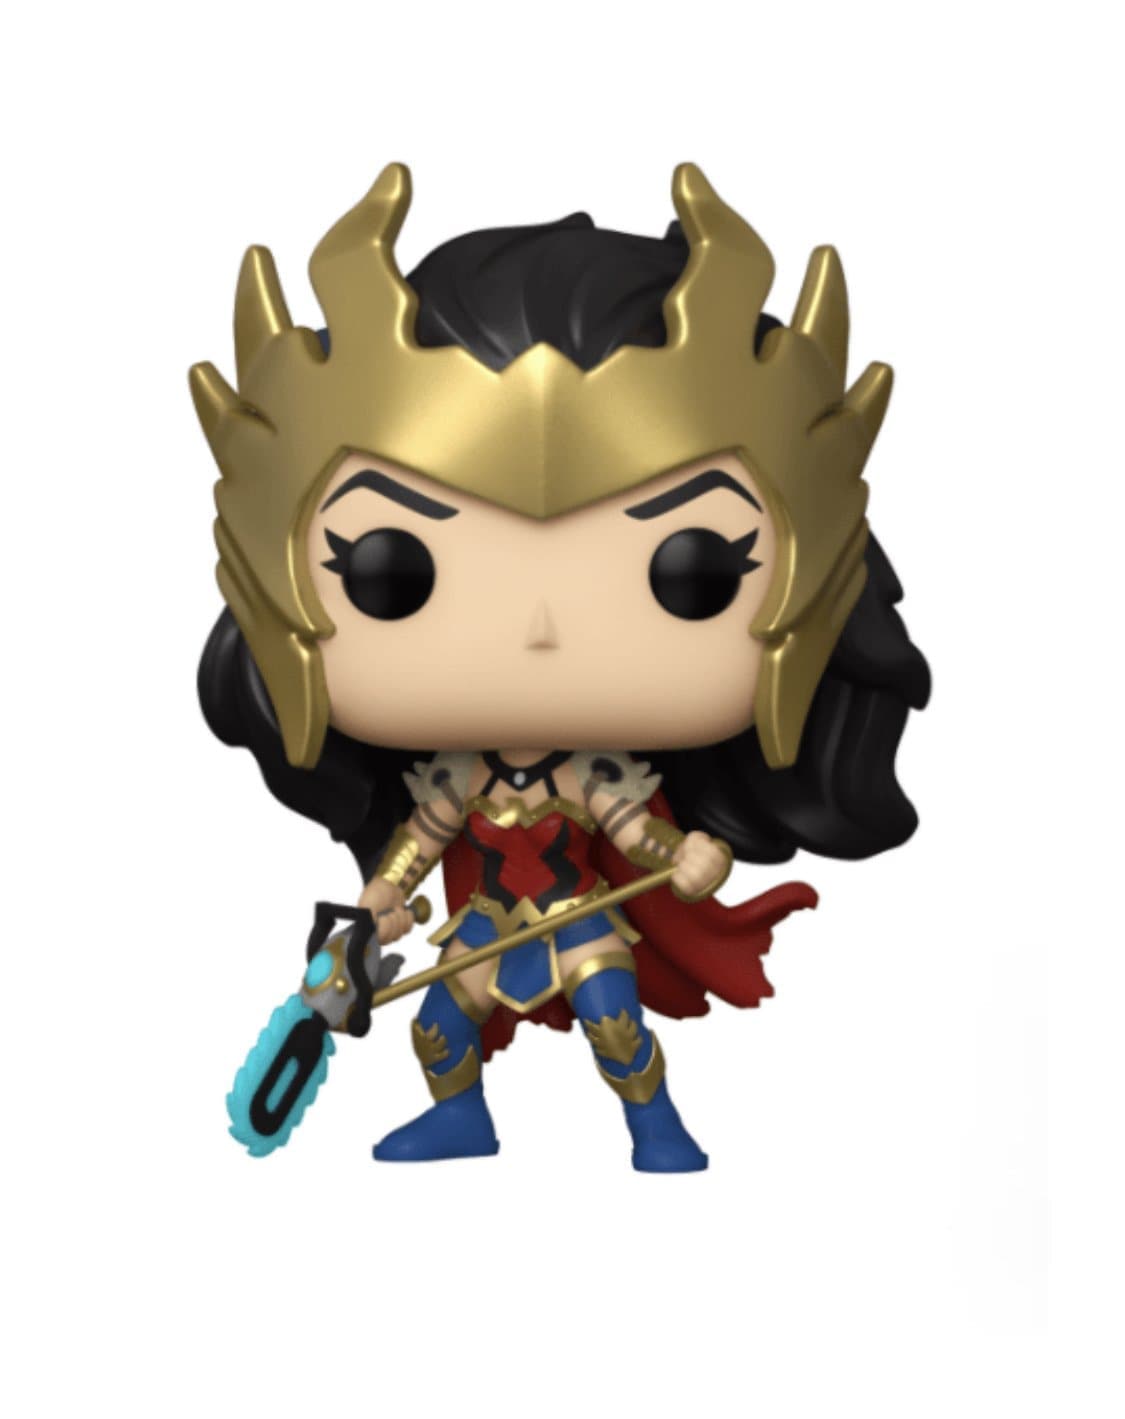 DC - Wonder Woman - Wonder Woman PX exclusive chance of Chase - Pop Figures